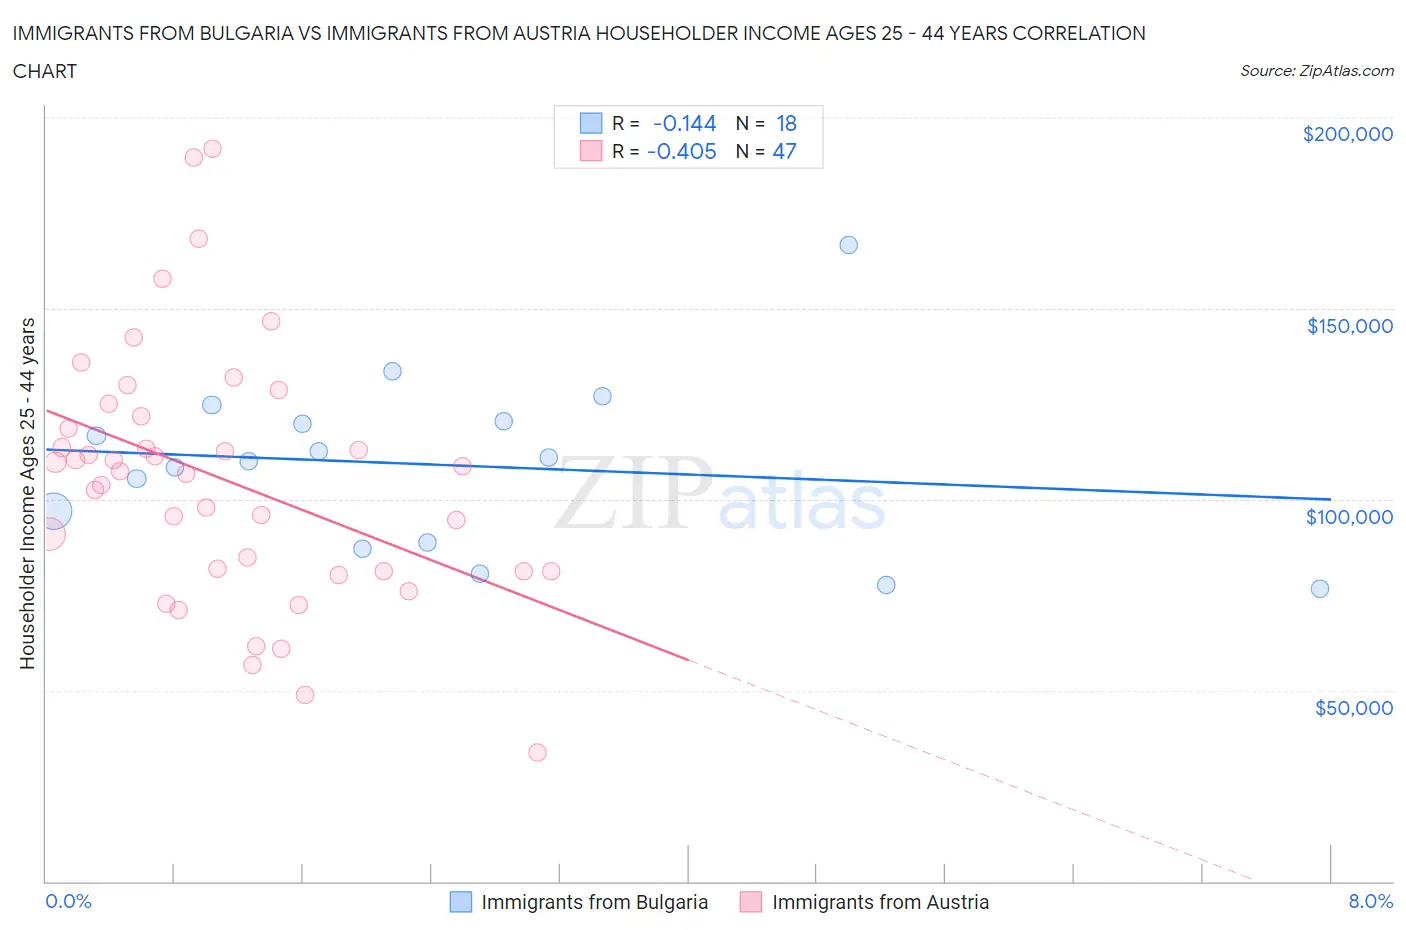 Immigrants from Bulgaria vs Immigrants from Austria Householder Income Ages 25 - 44 years